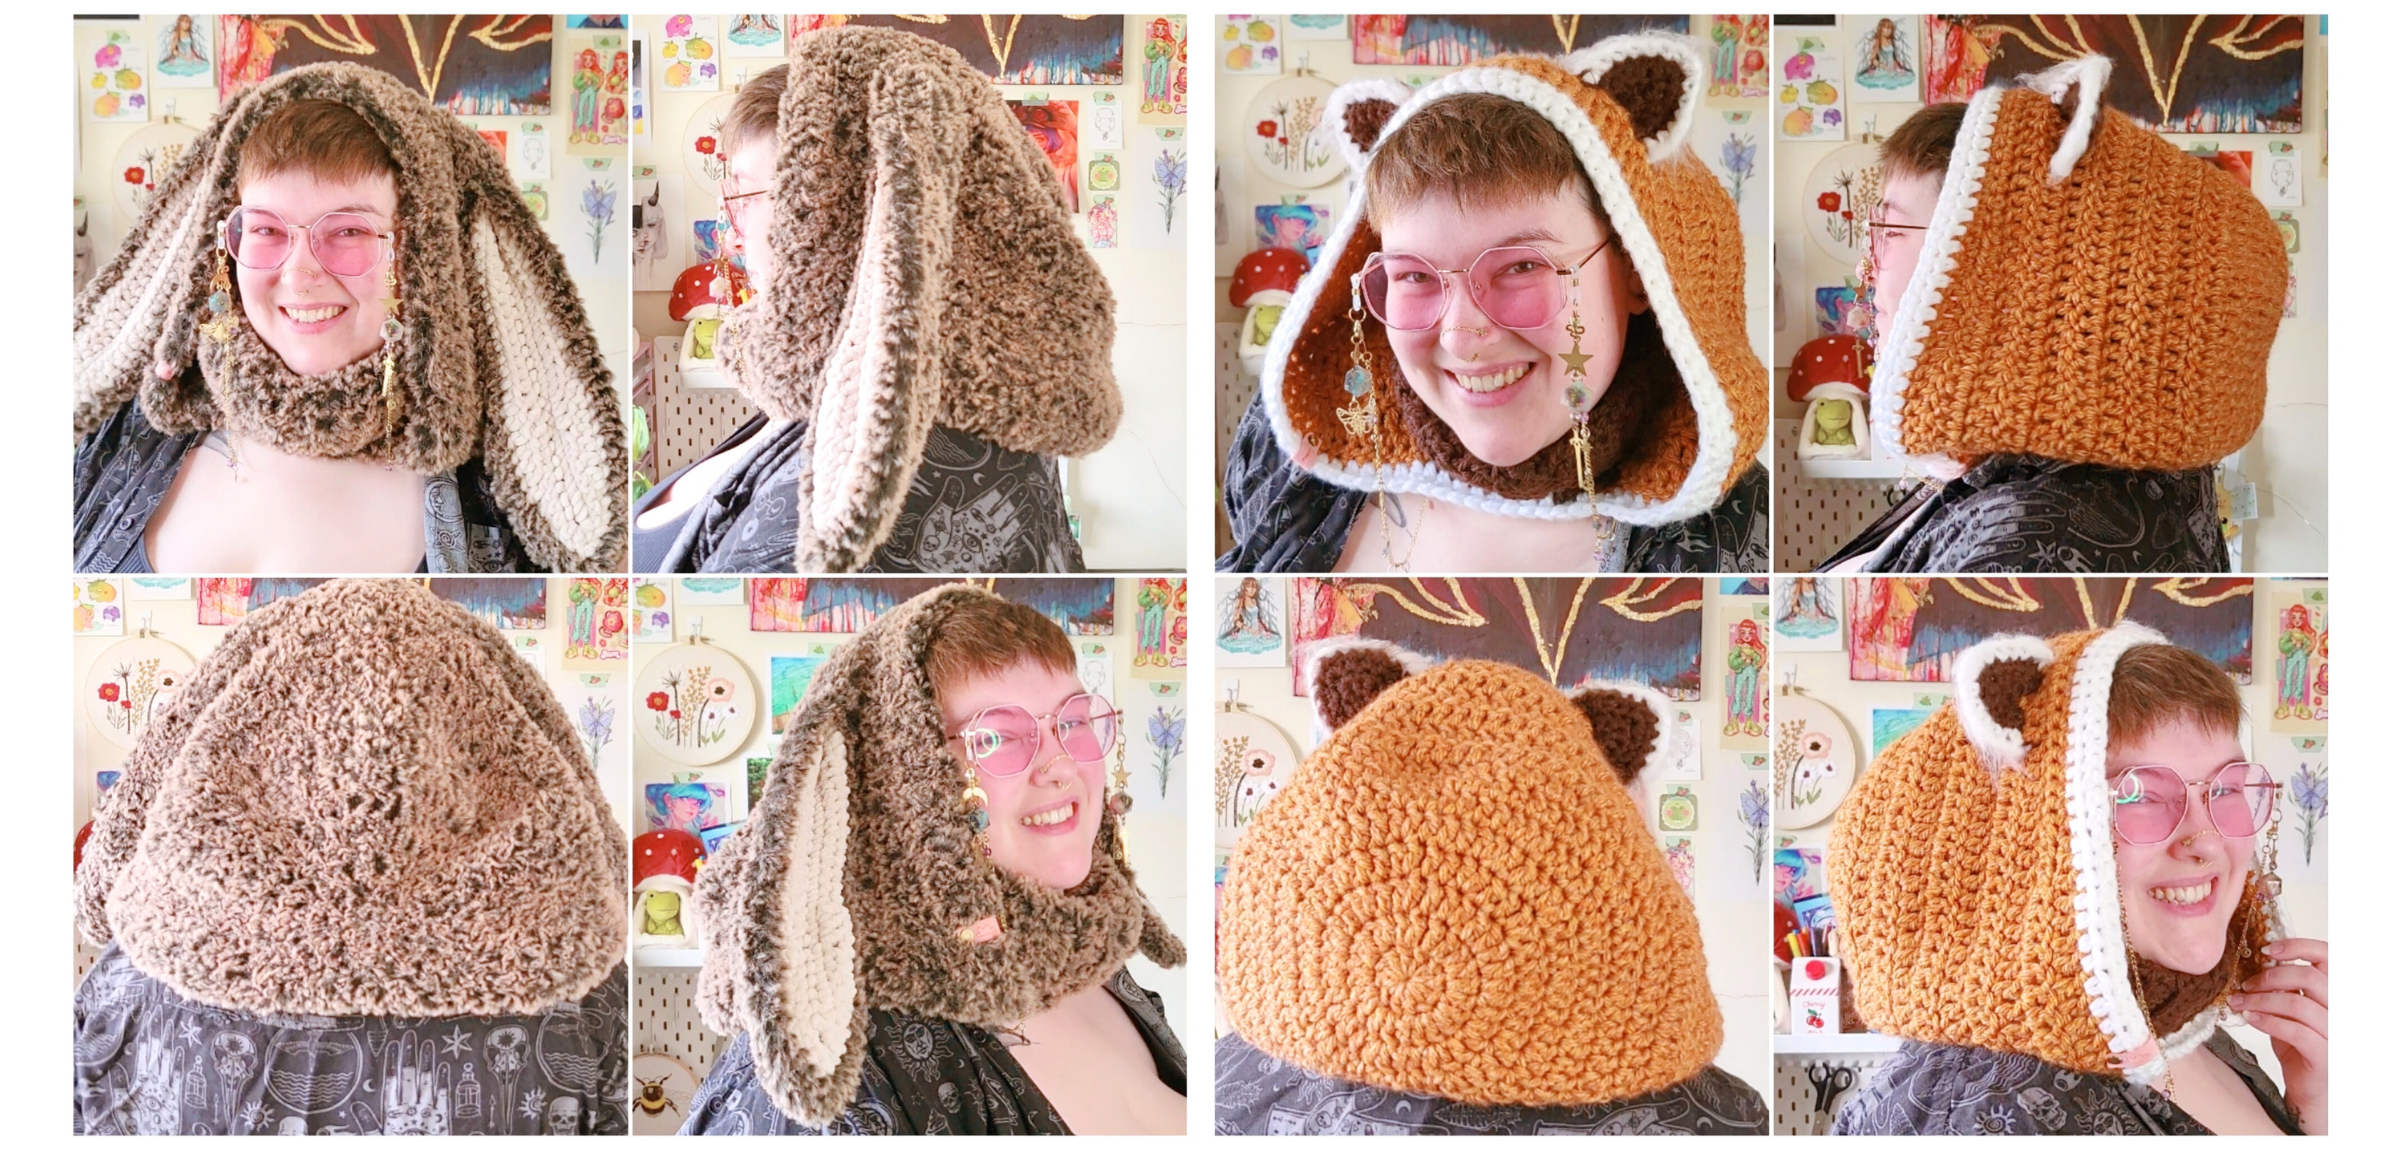 8 photos of Rayn wearing two different animal ear hoods and showing them from different angles.